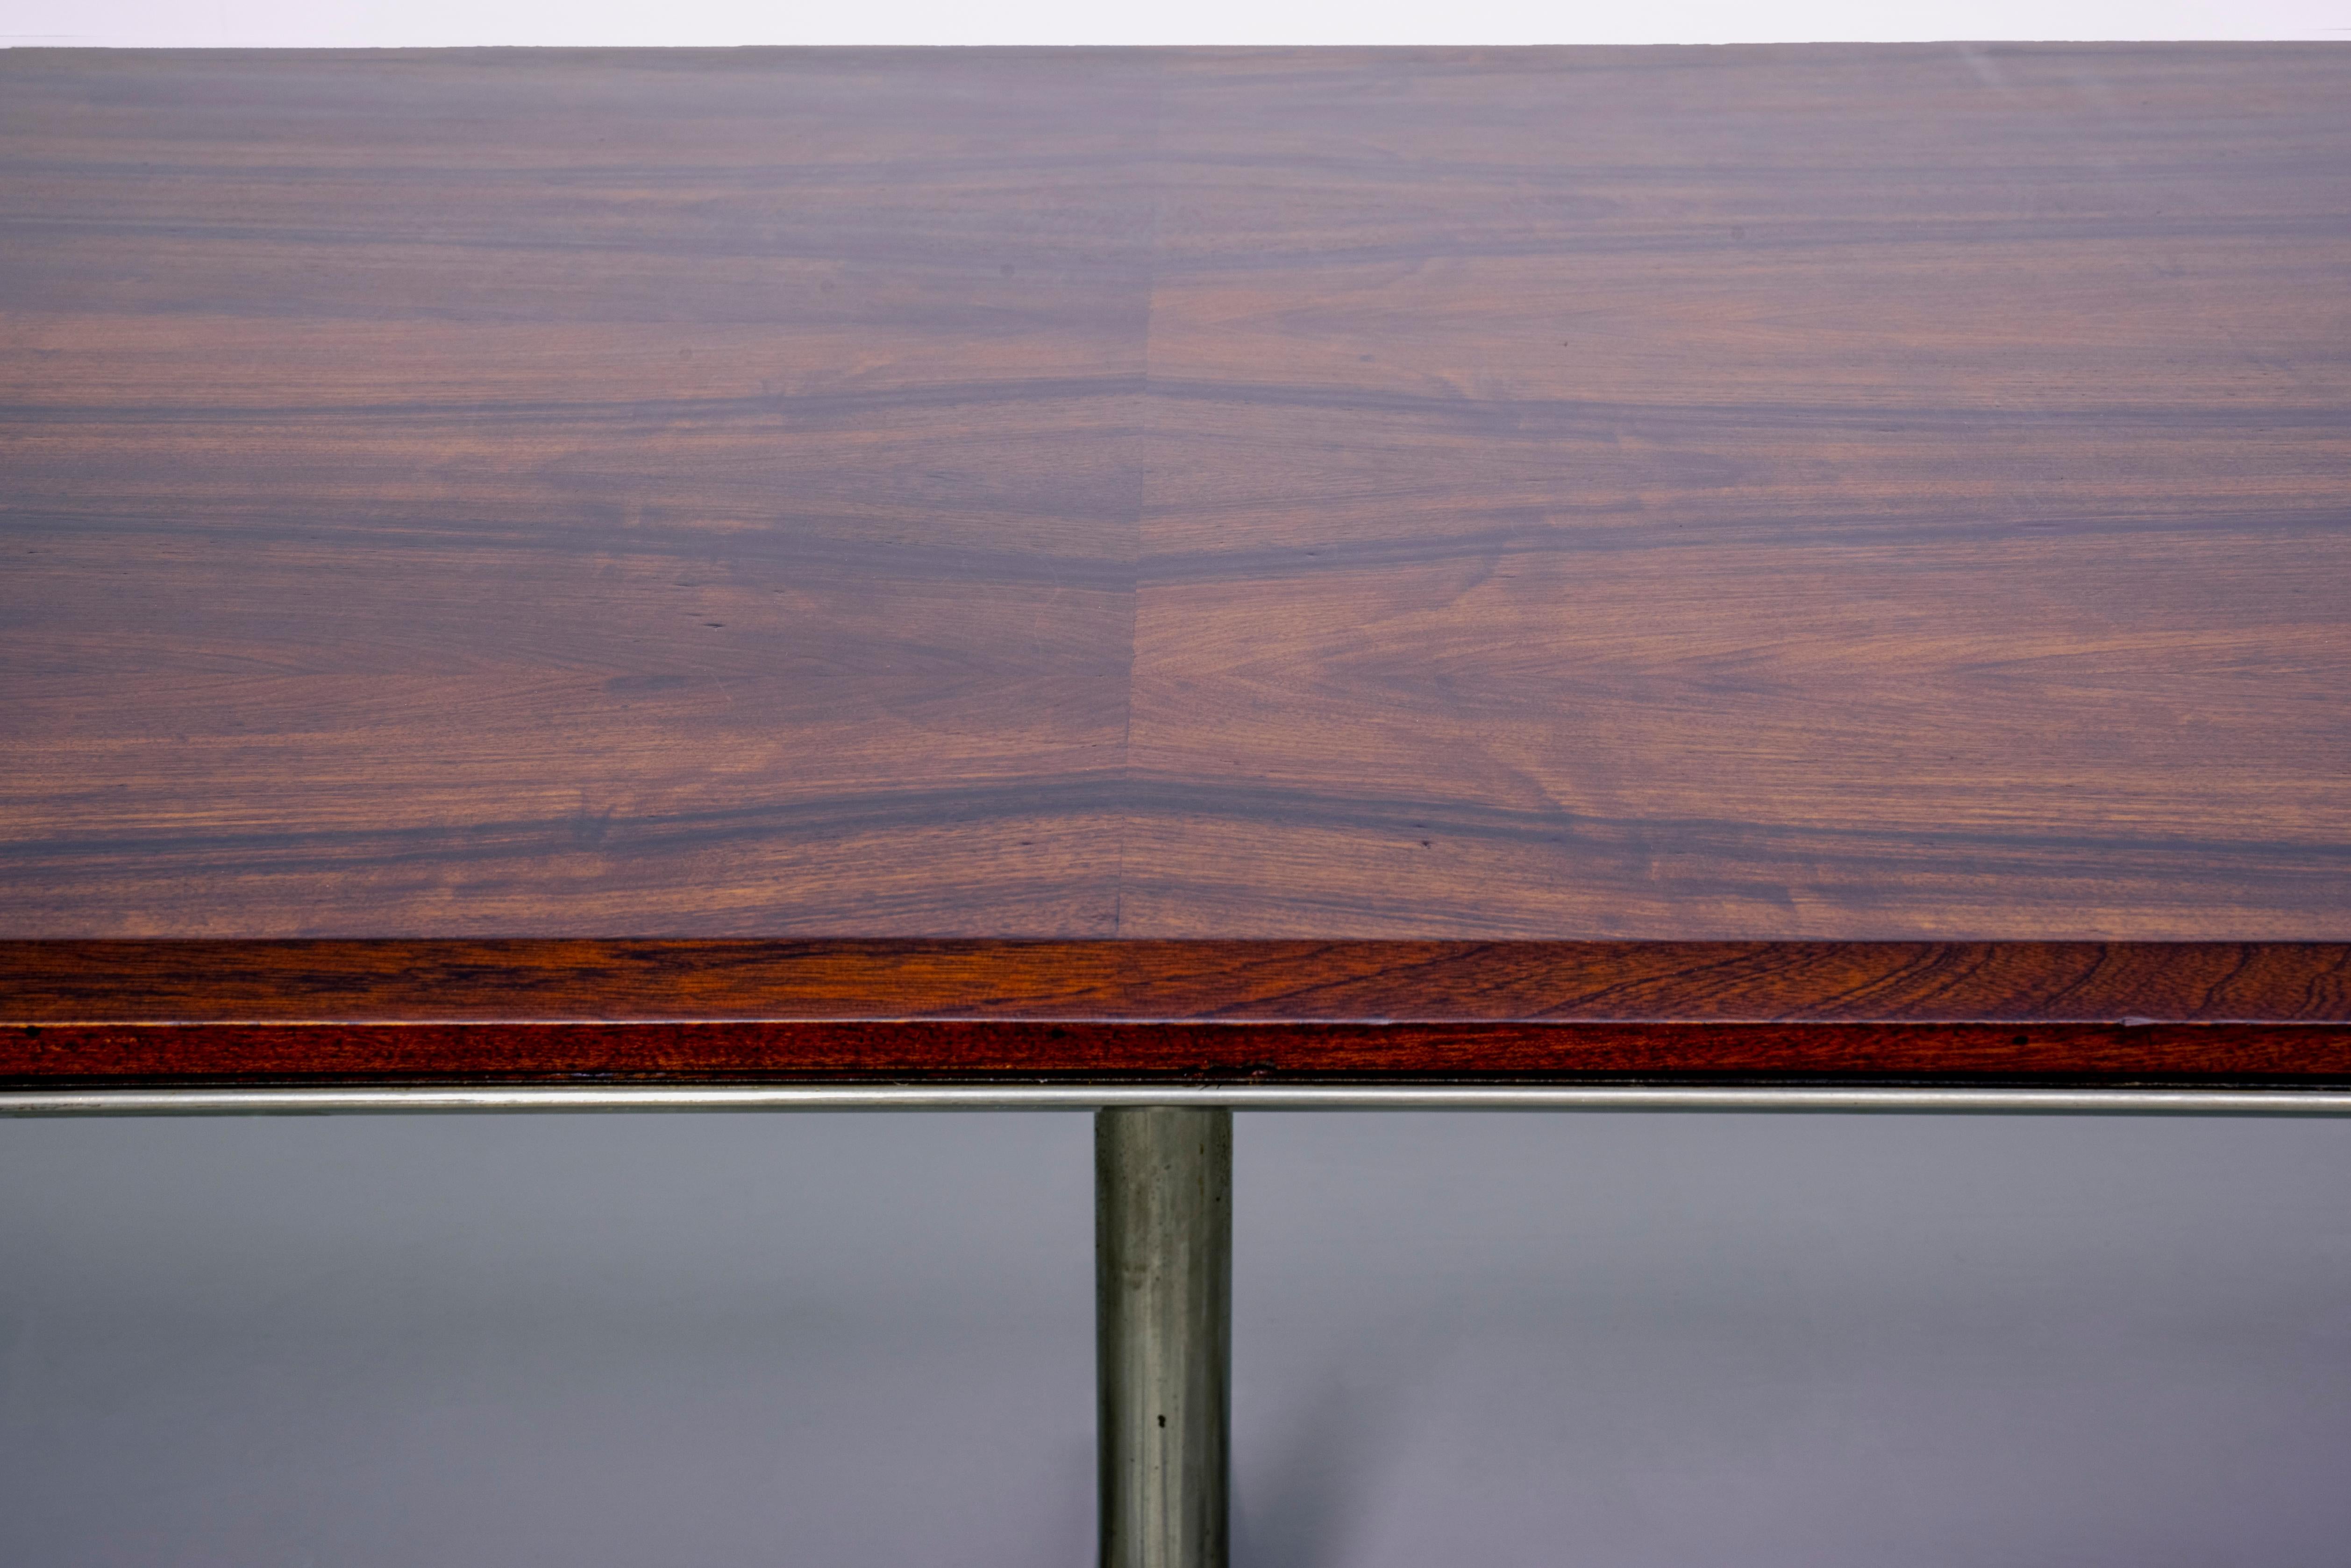 Italian Set of 2 'Pirellone' Rosewood Direction Tables by Gio Ponti for RIMA Italy, 1958